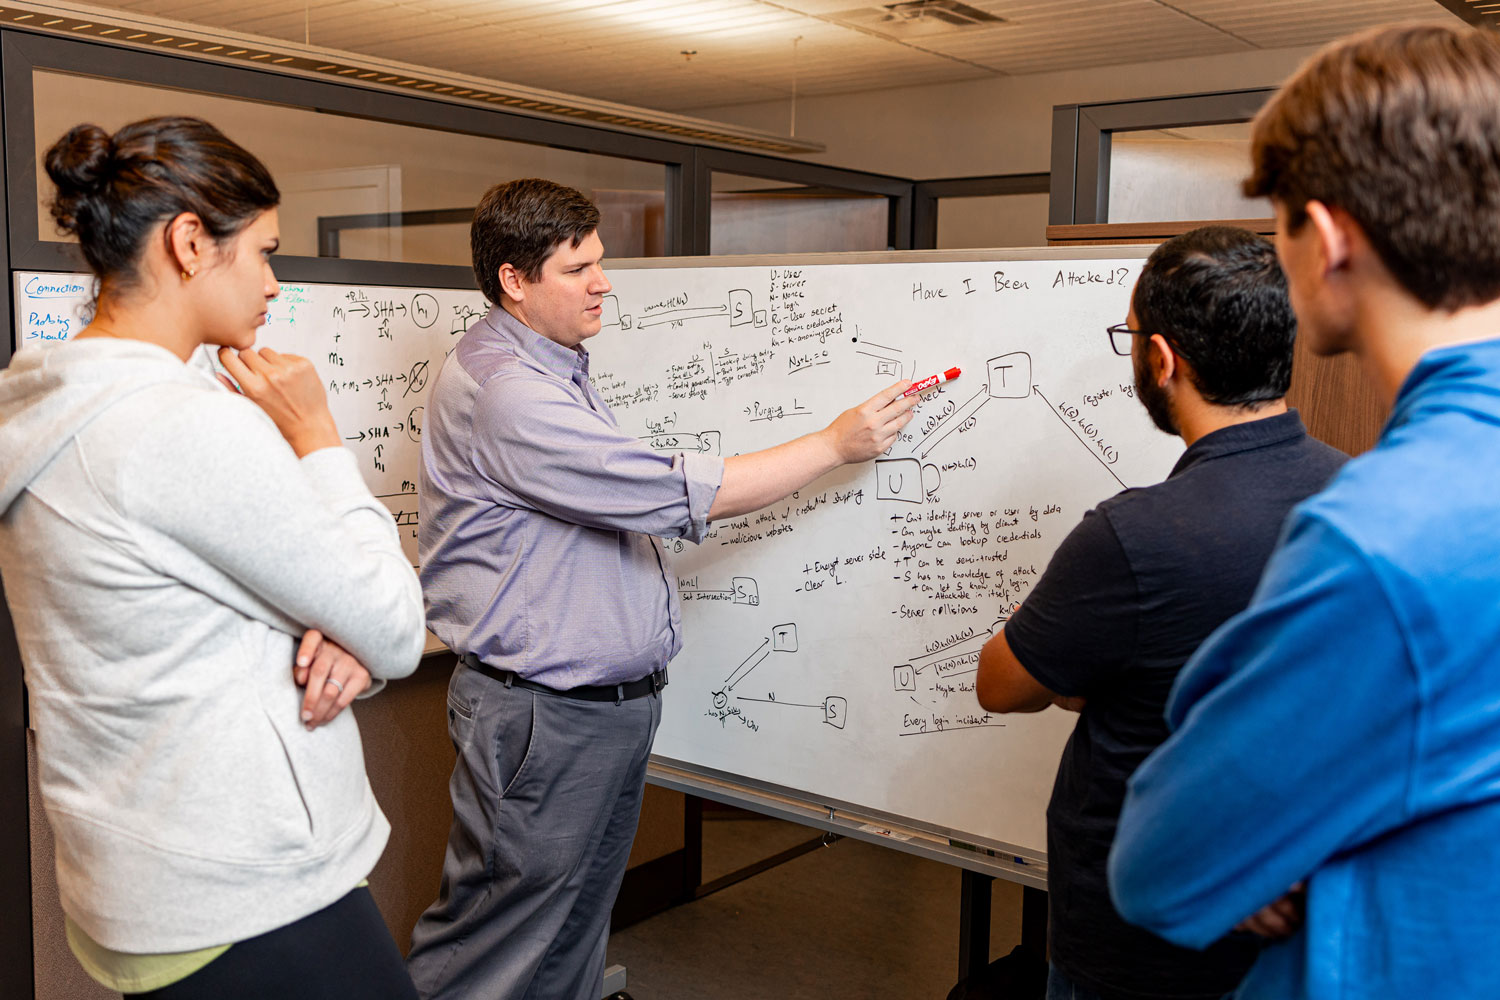 Scott Ruoti works on white board with grad students in lab